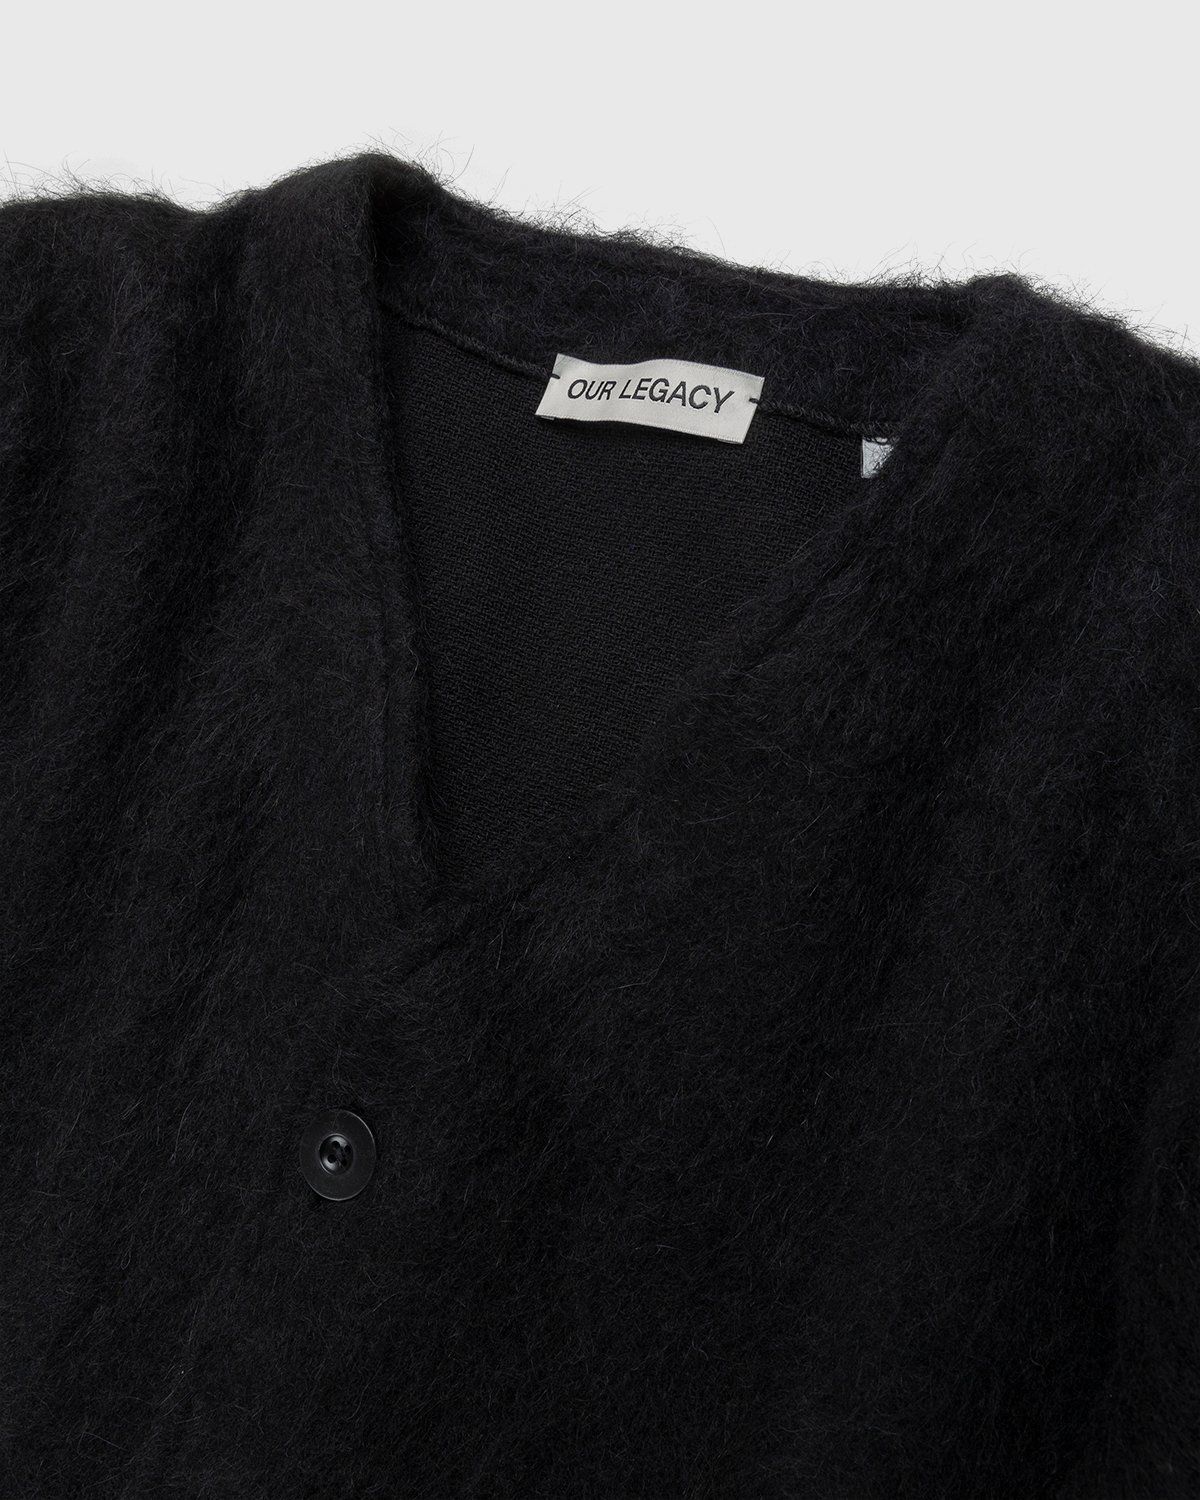 Our Legacy – Cardigan Black Mohair - Cardigans - Black - Image 3